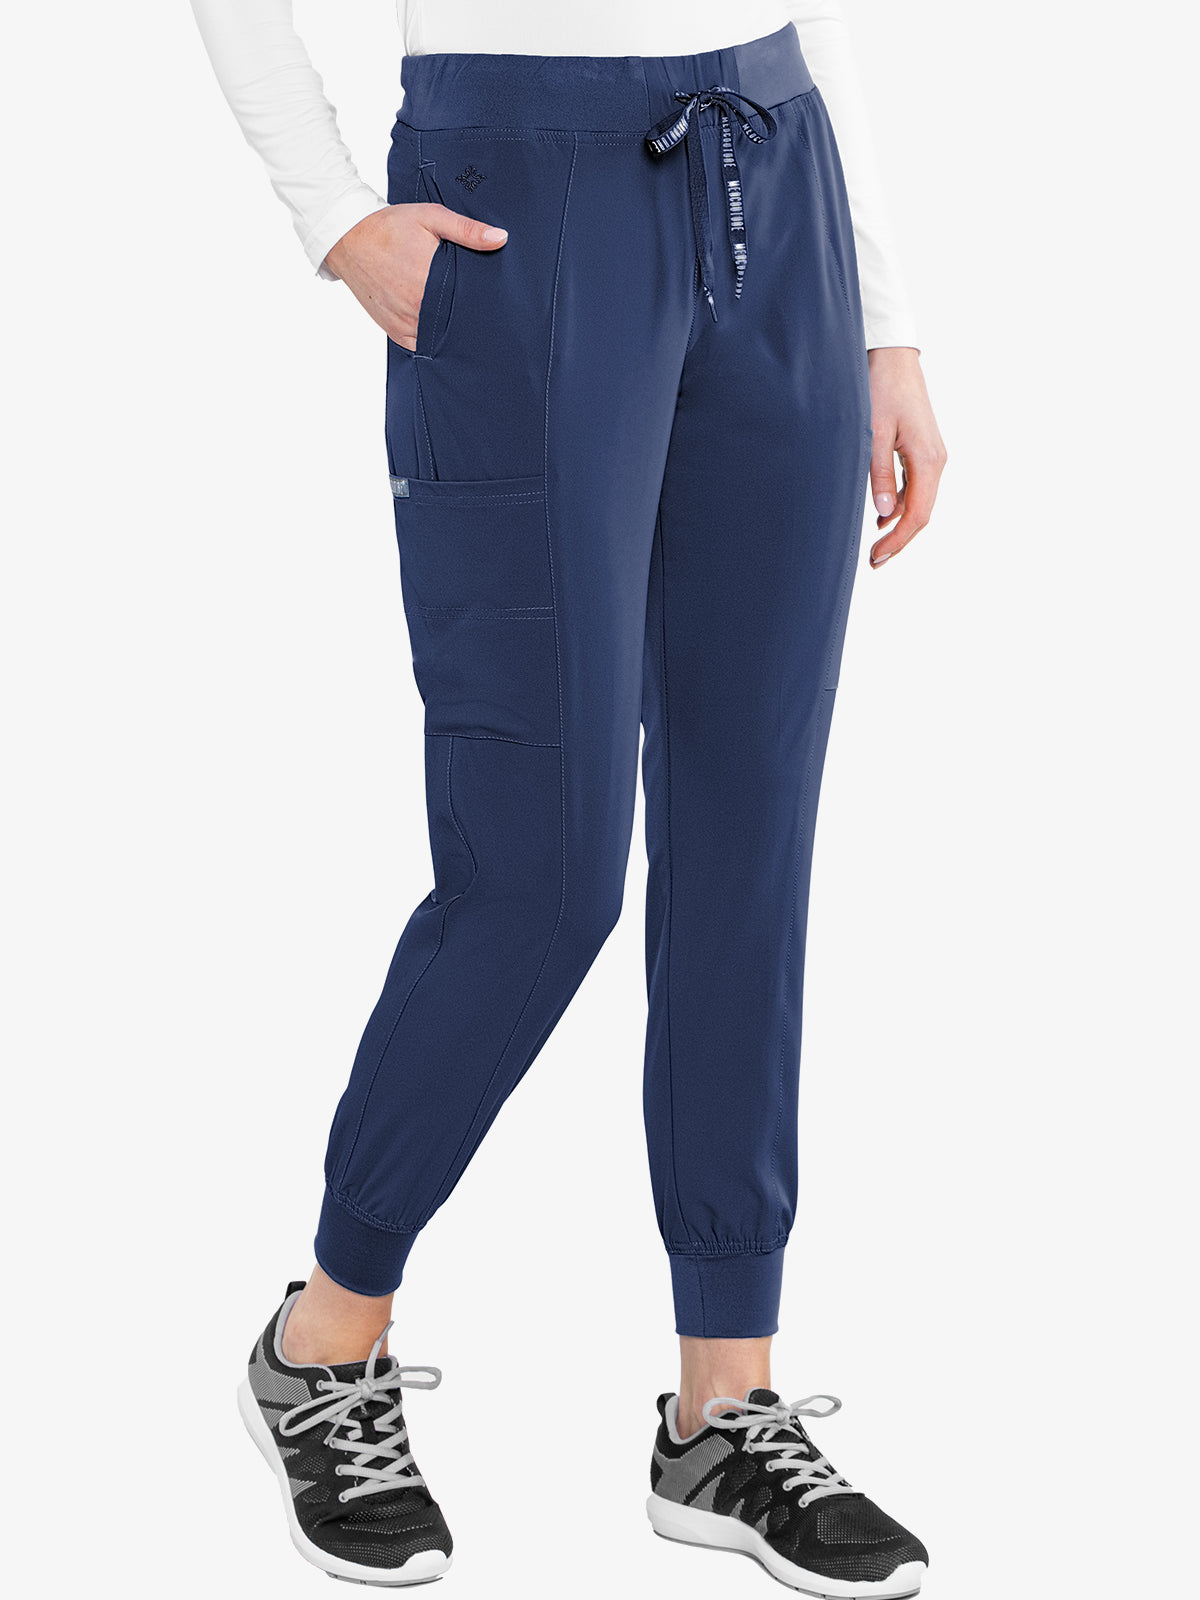 Med Couture Peaches 8721 Seamed Jogger Scrub Pant navy